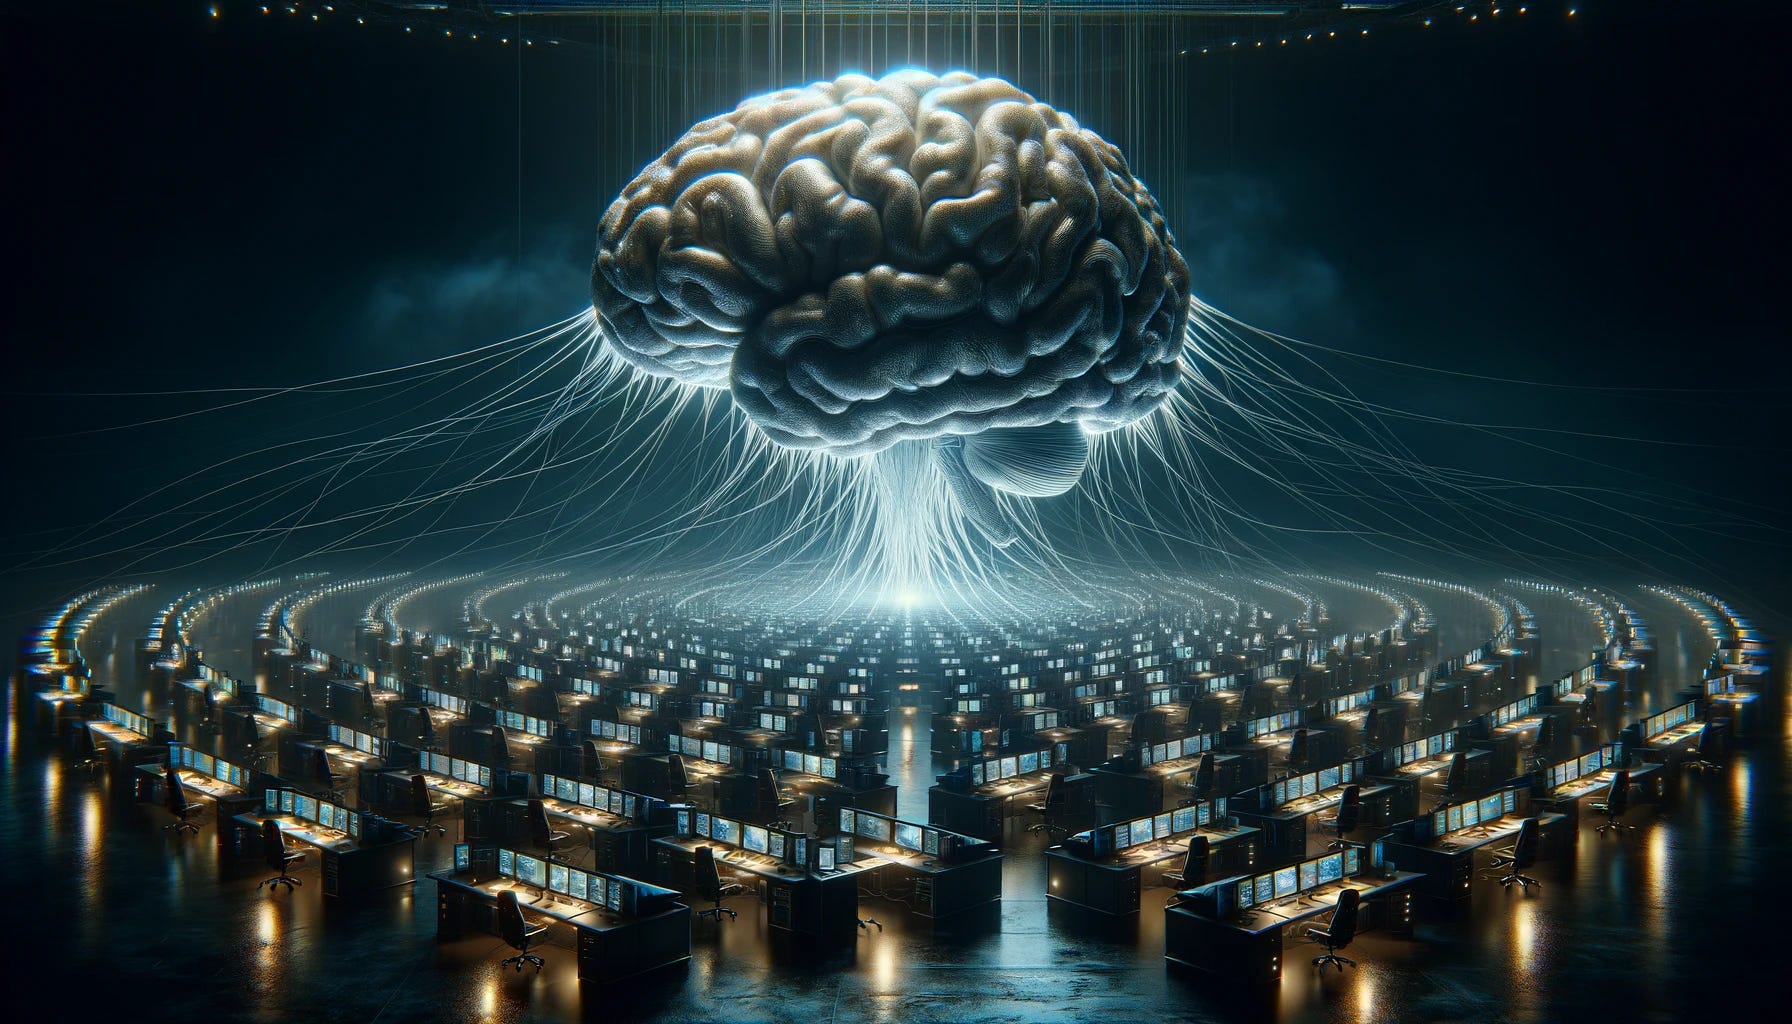 A photo-realistic, surreal image in 16:9 format. The scene depicts a massive, intricately detailed brain floating above a vast, dark space filled with dozens of desks. Each desk is equipped with screens, computers, and laptops, all intricately wired to the brain. The brain, glowing subtly, is the central focus, with wires extending like neurons, connecting it to each piece of technology below. The atmosphere is dark and mysterious, emphasizing the grandeur and complexity of the brain. The lighting is strategically placed to highlight the brain and the top of the desks, creating a dramatic, immersive scene.